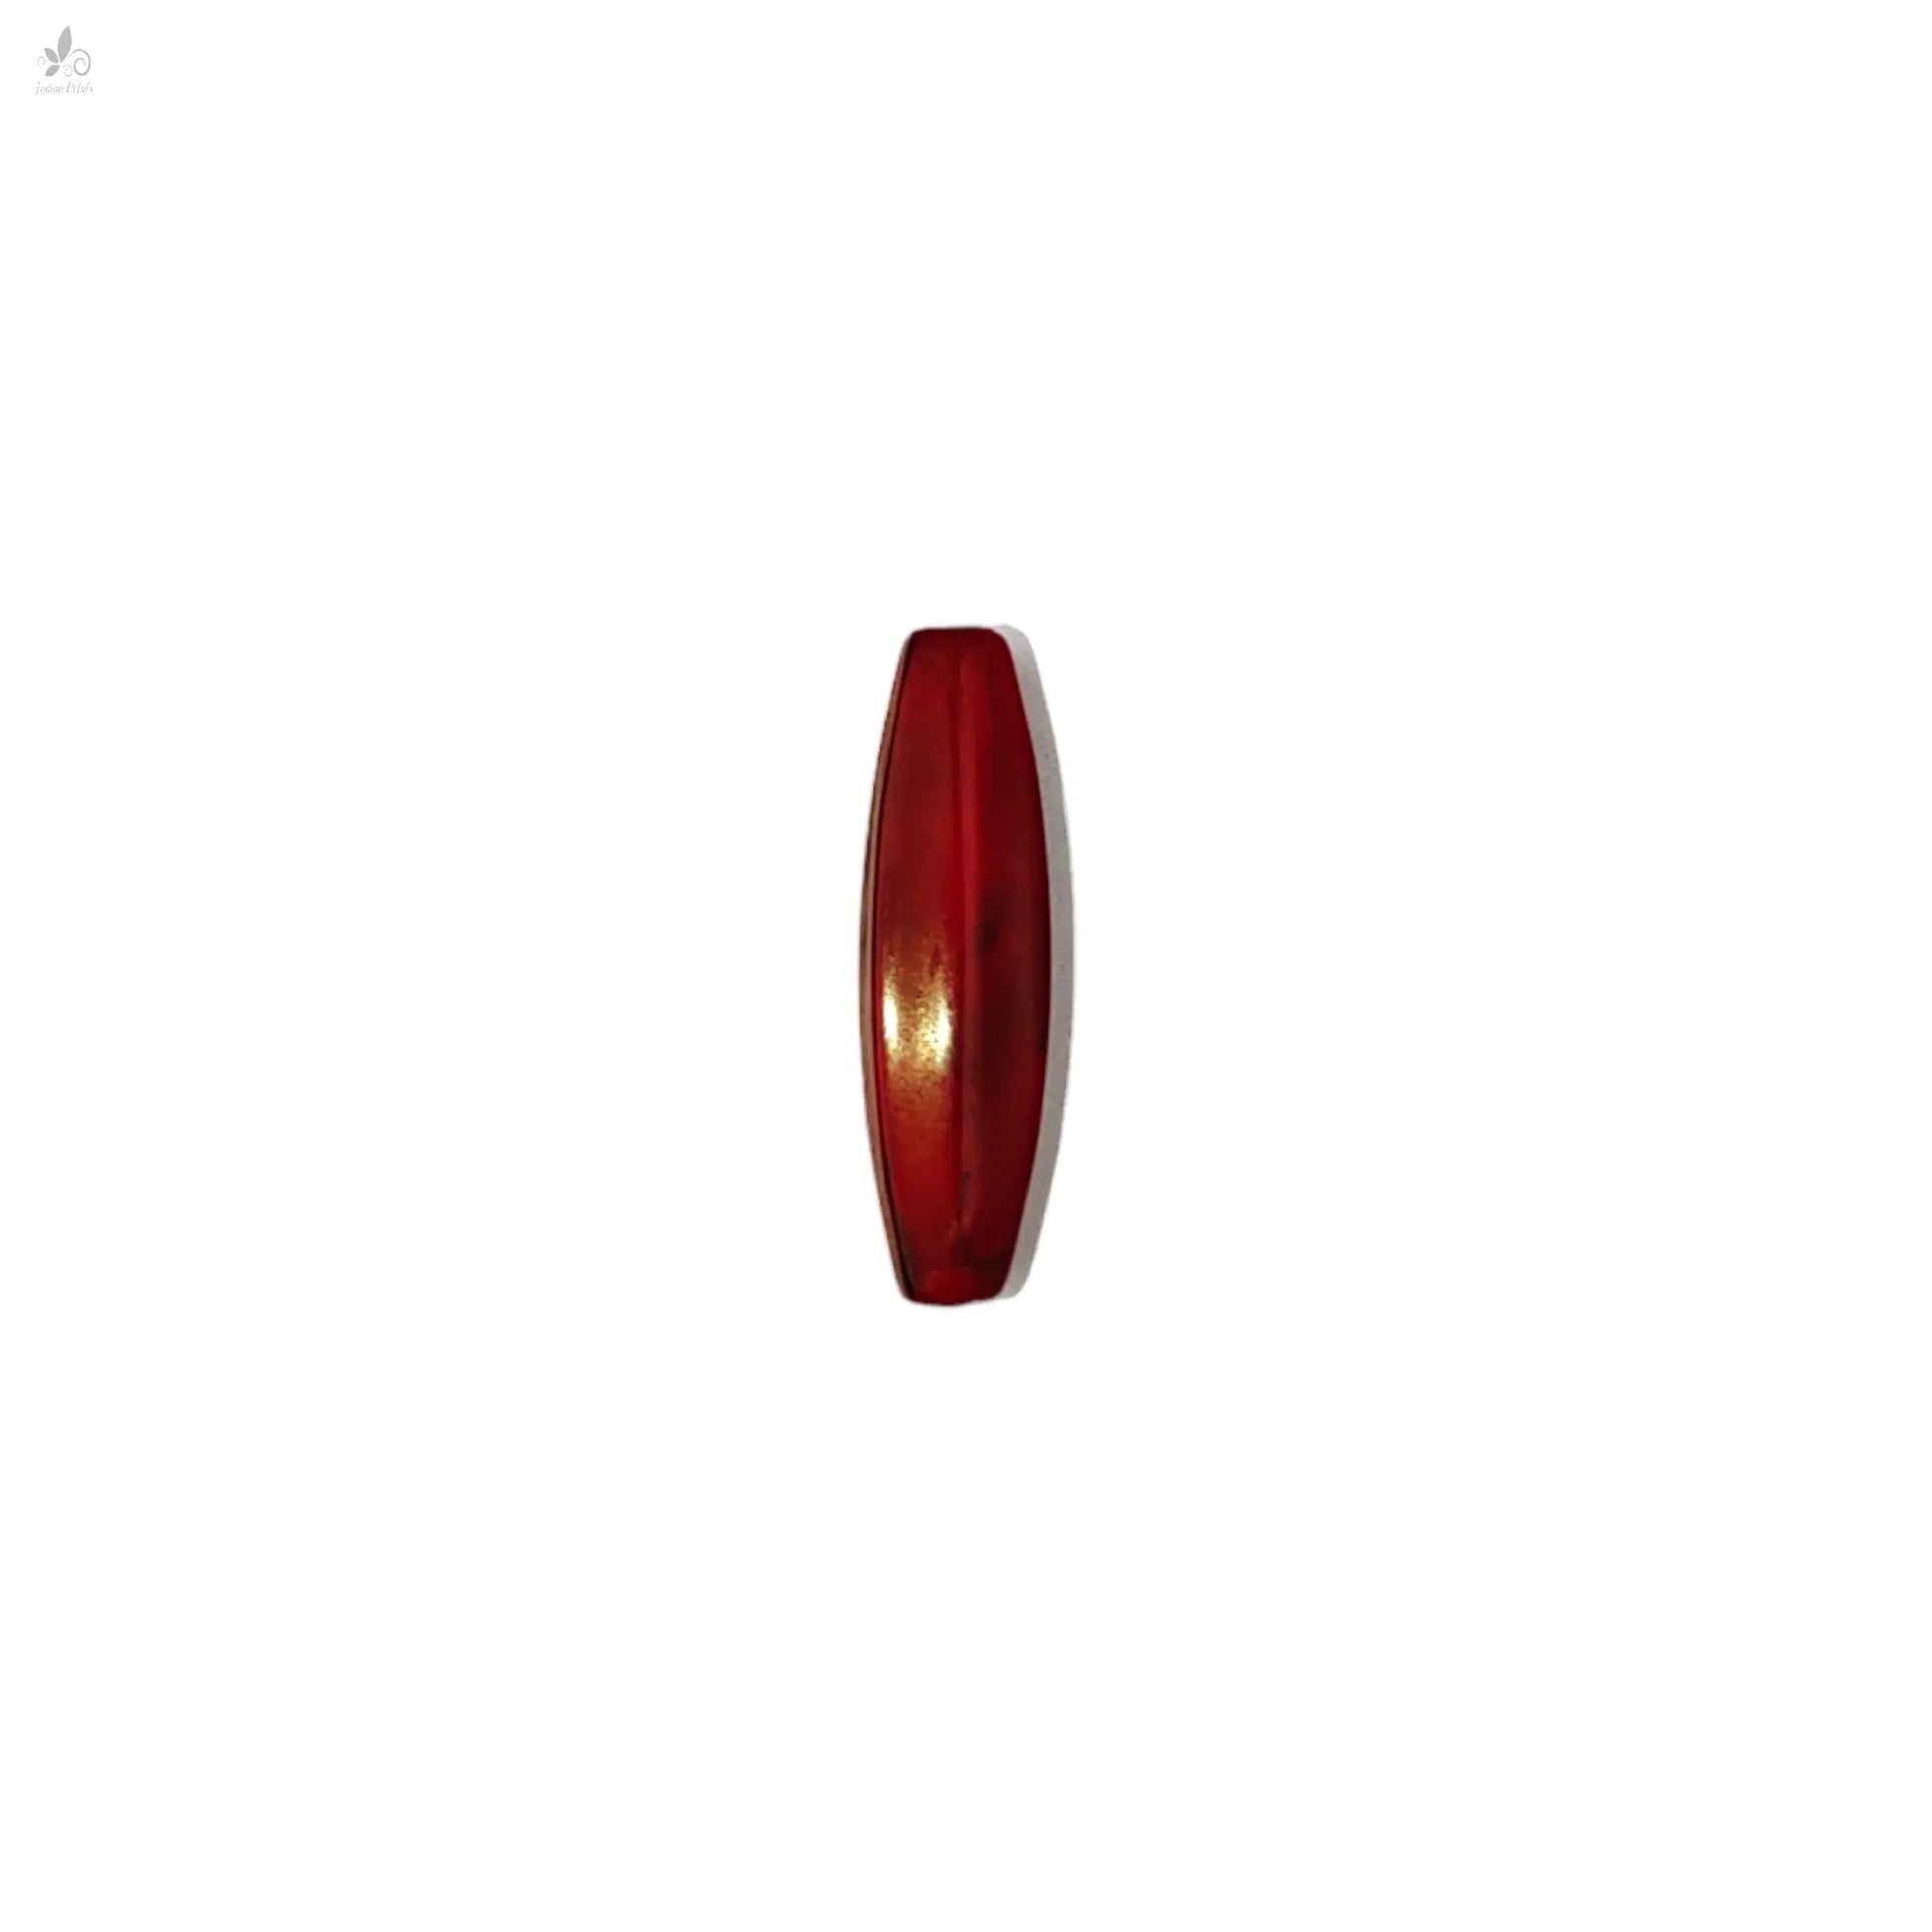 Indian Petals Dark Red Resin Pipe Motif for Craft or Decoration, Jewelry Making - 13558